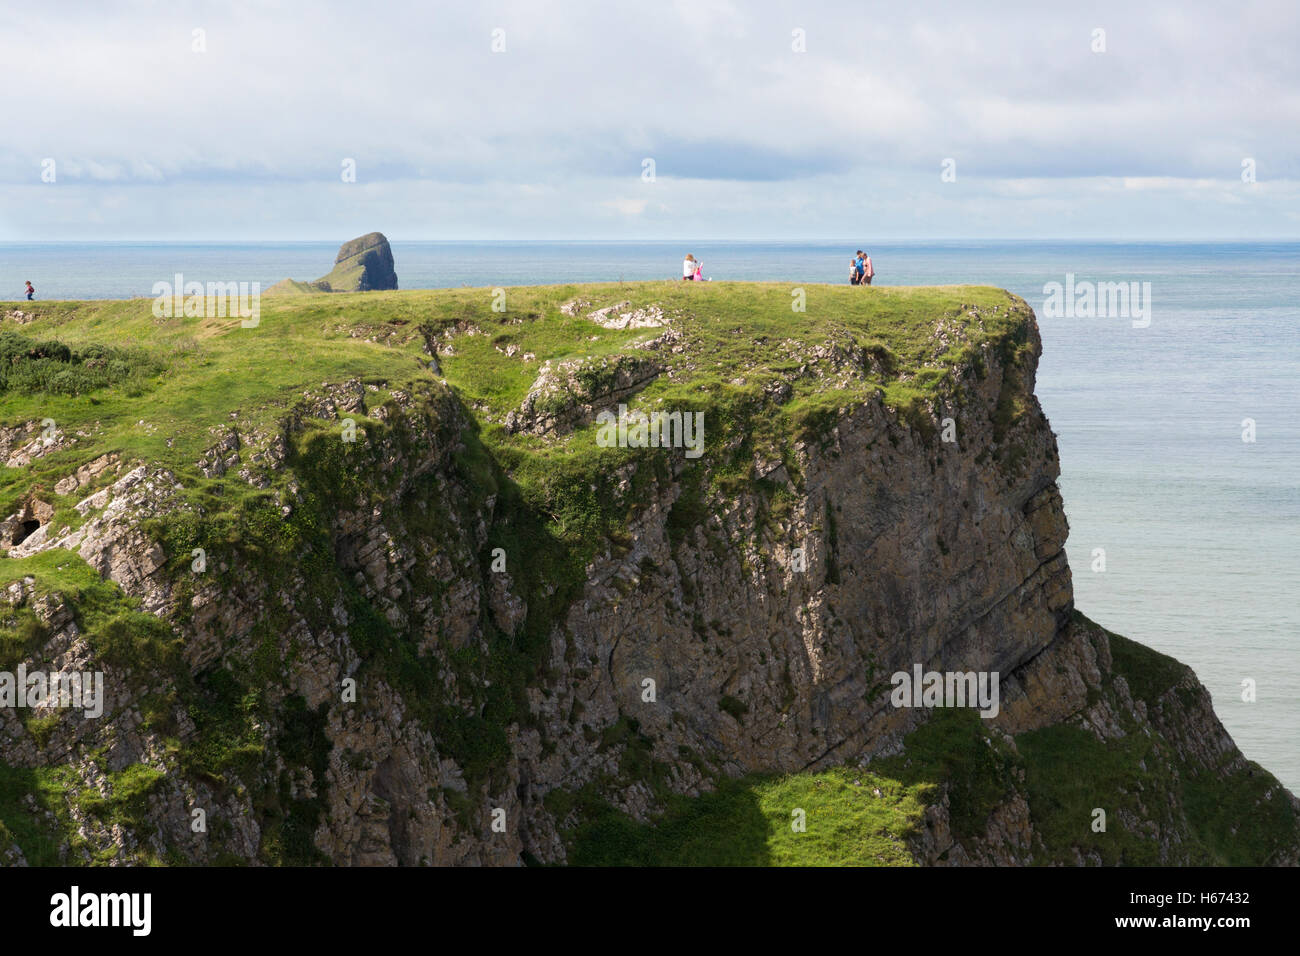 Sightseers on cliffs at Rhossili Bay, the Gower Peninsula Stock Photo